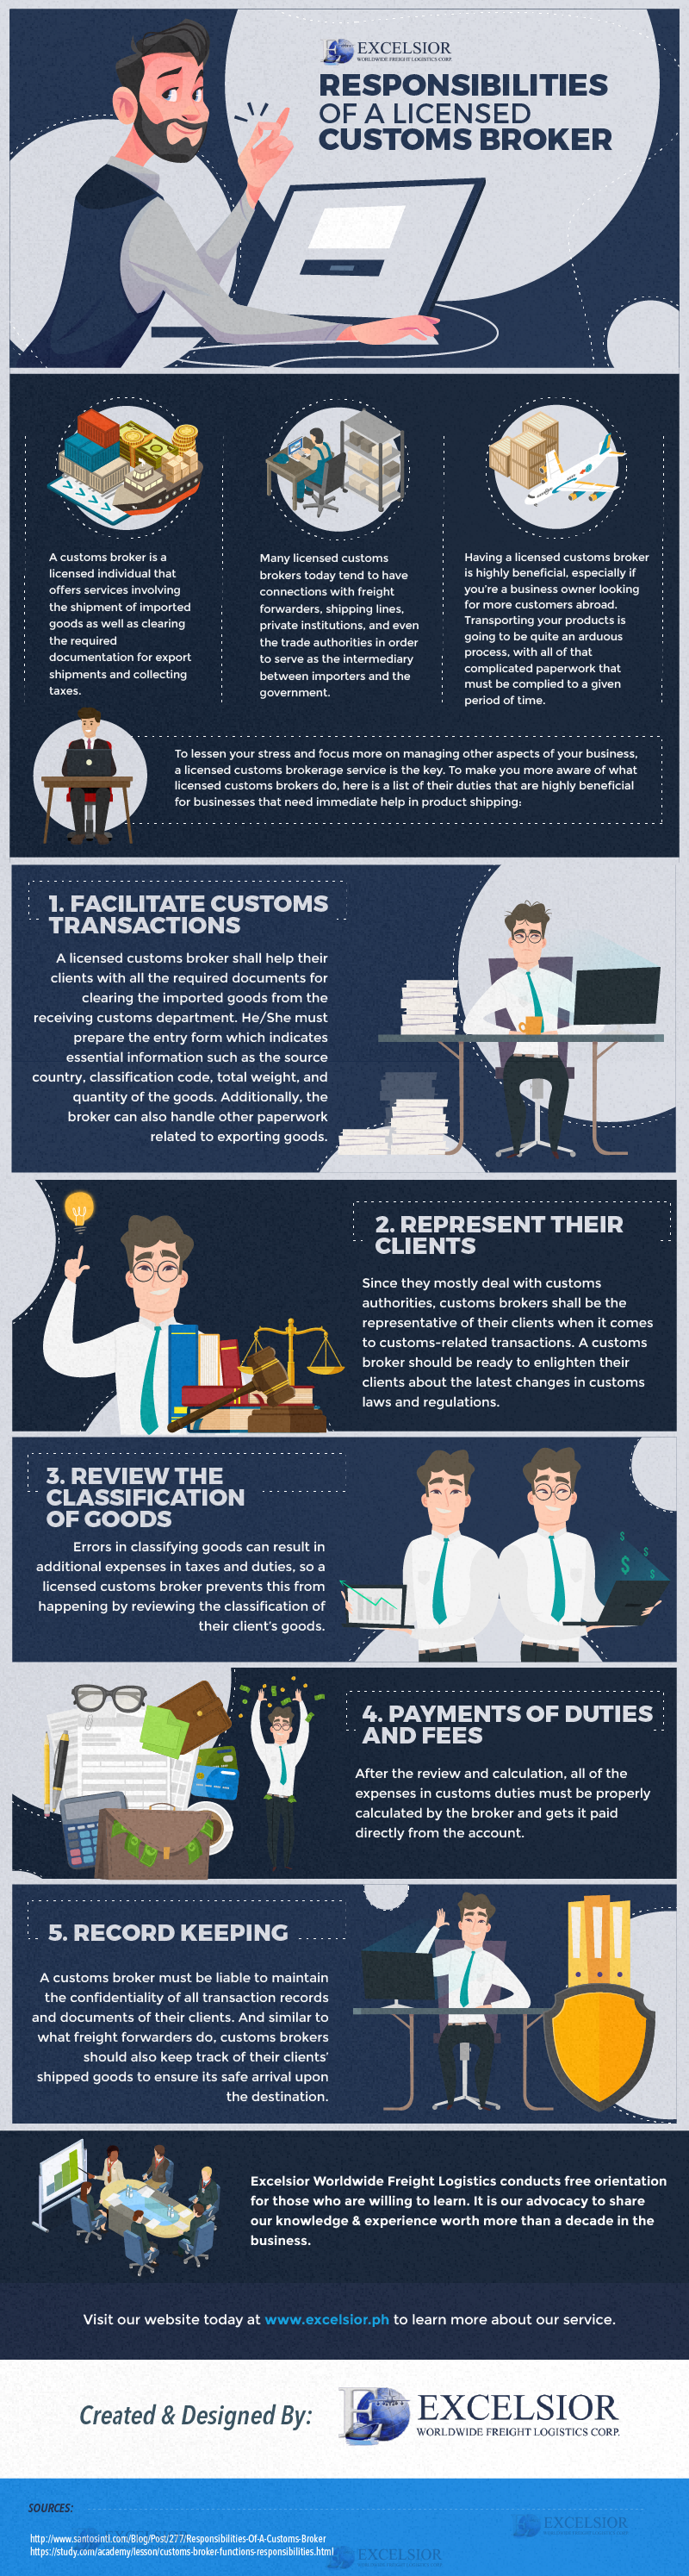 Responsibilities of a Licensed Customs Broker - Infographic